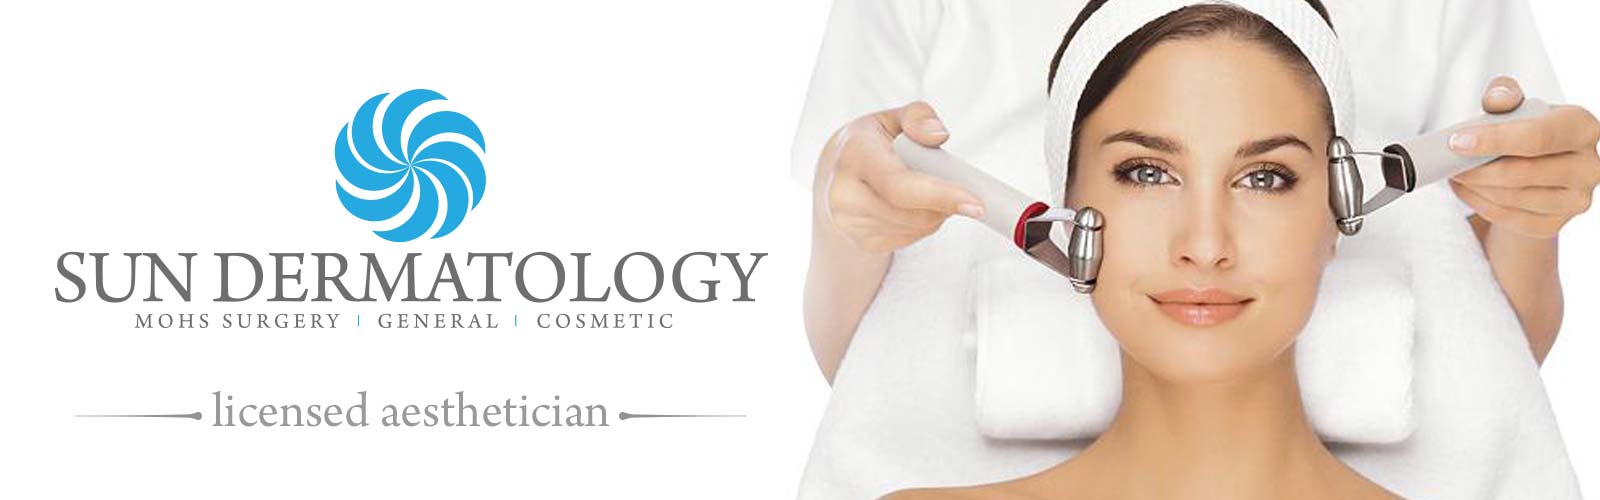 Dermatology Services and Procedures at Sun Dermatology in Panama City, Florida